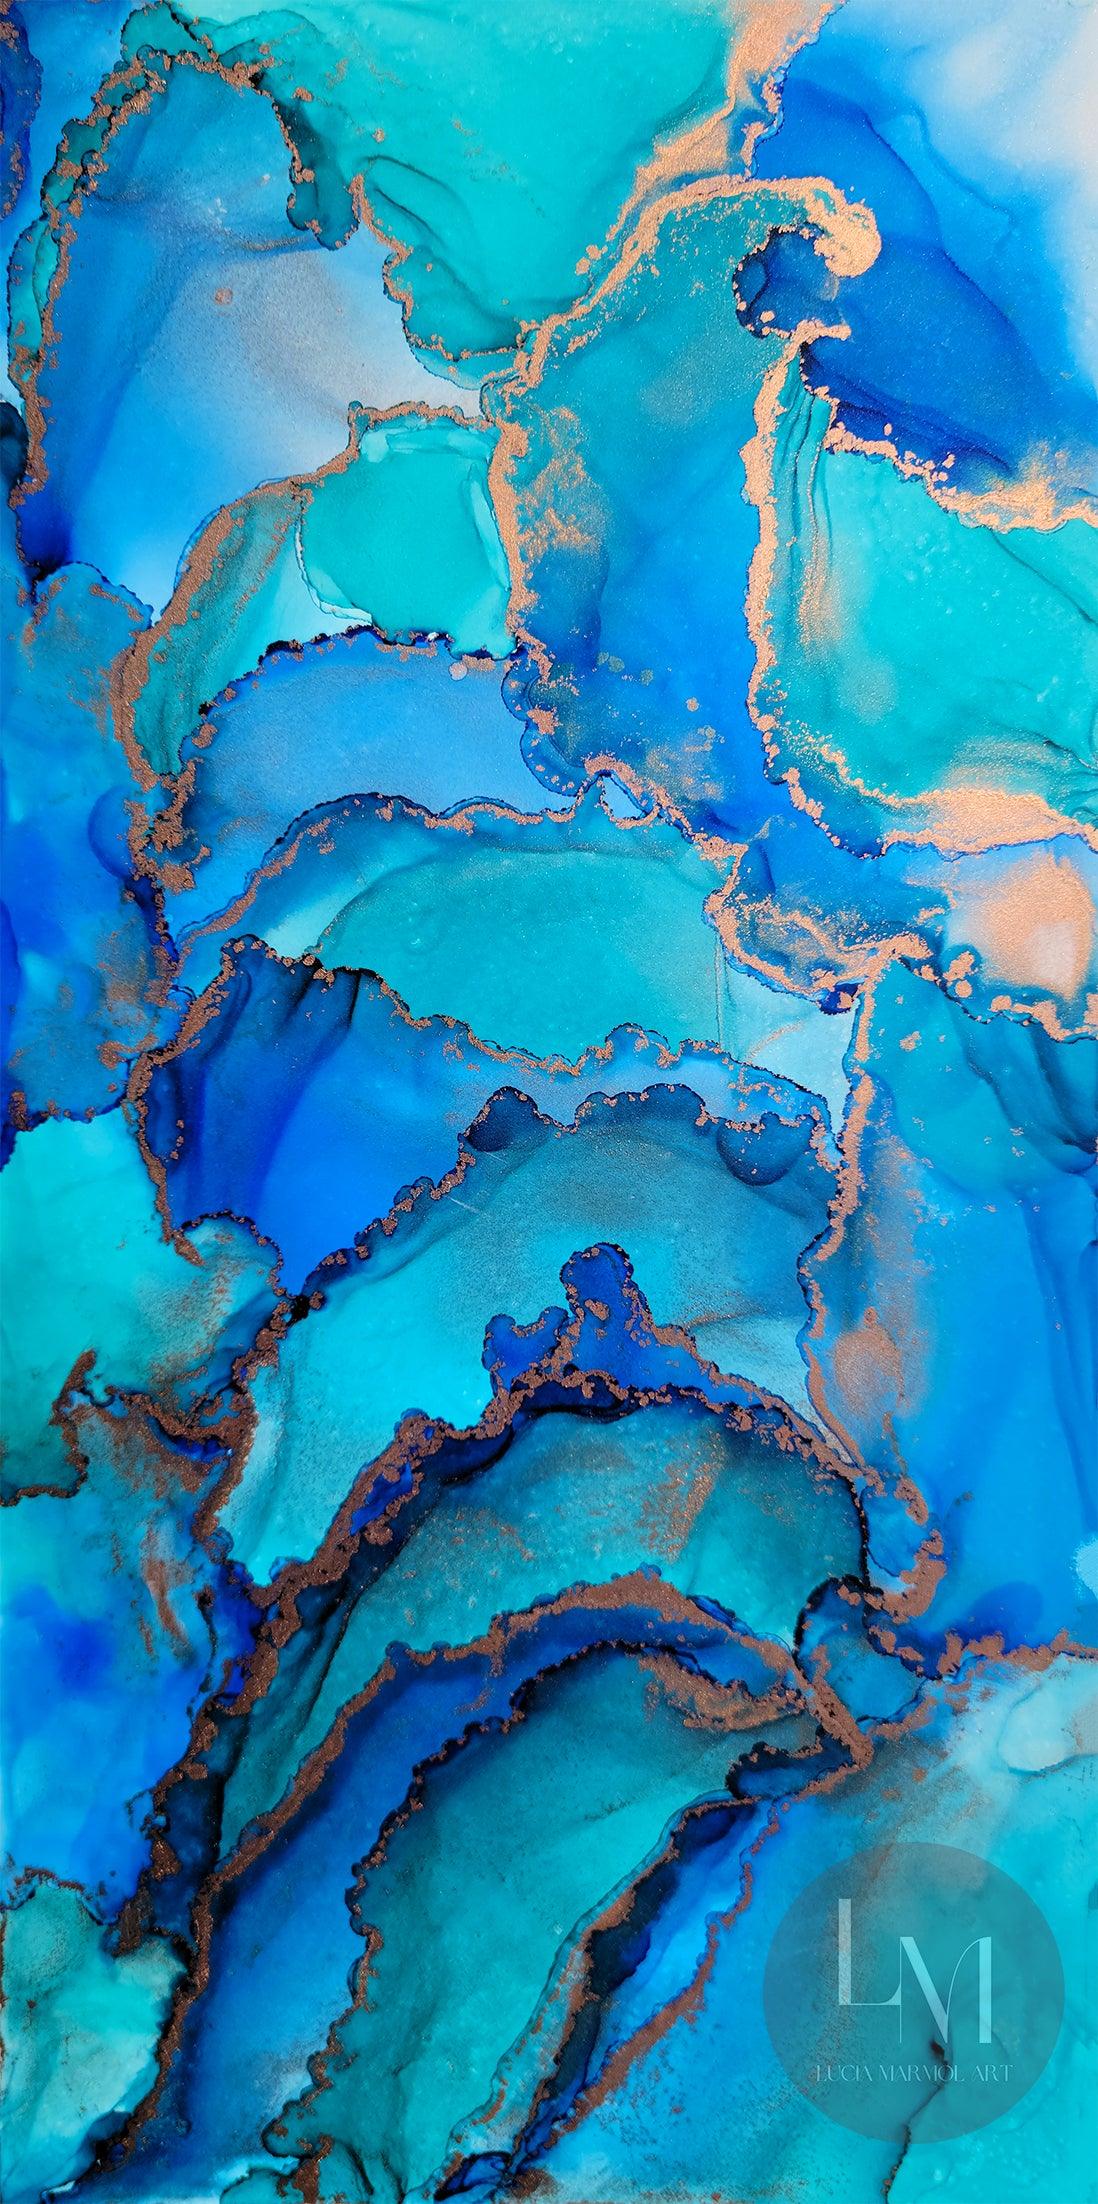 This original alcohol ink artwork features blue and teal alcohol ink with copper alcohol ink accents on white synthetic paper.